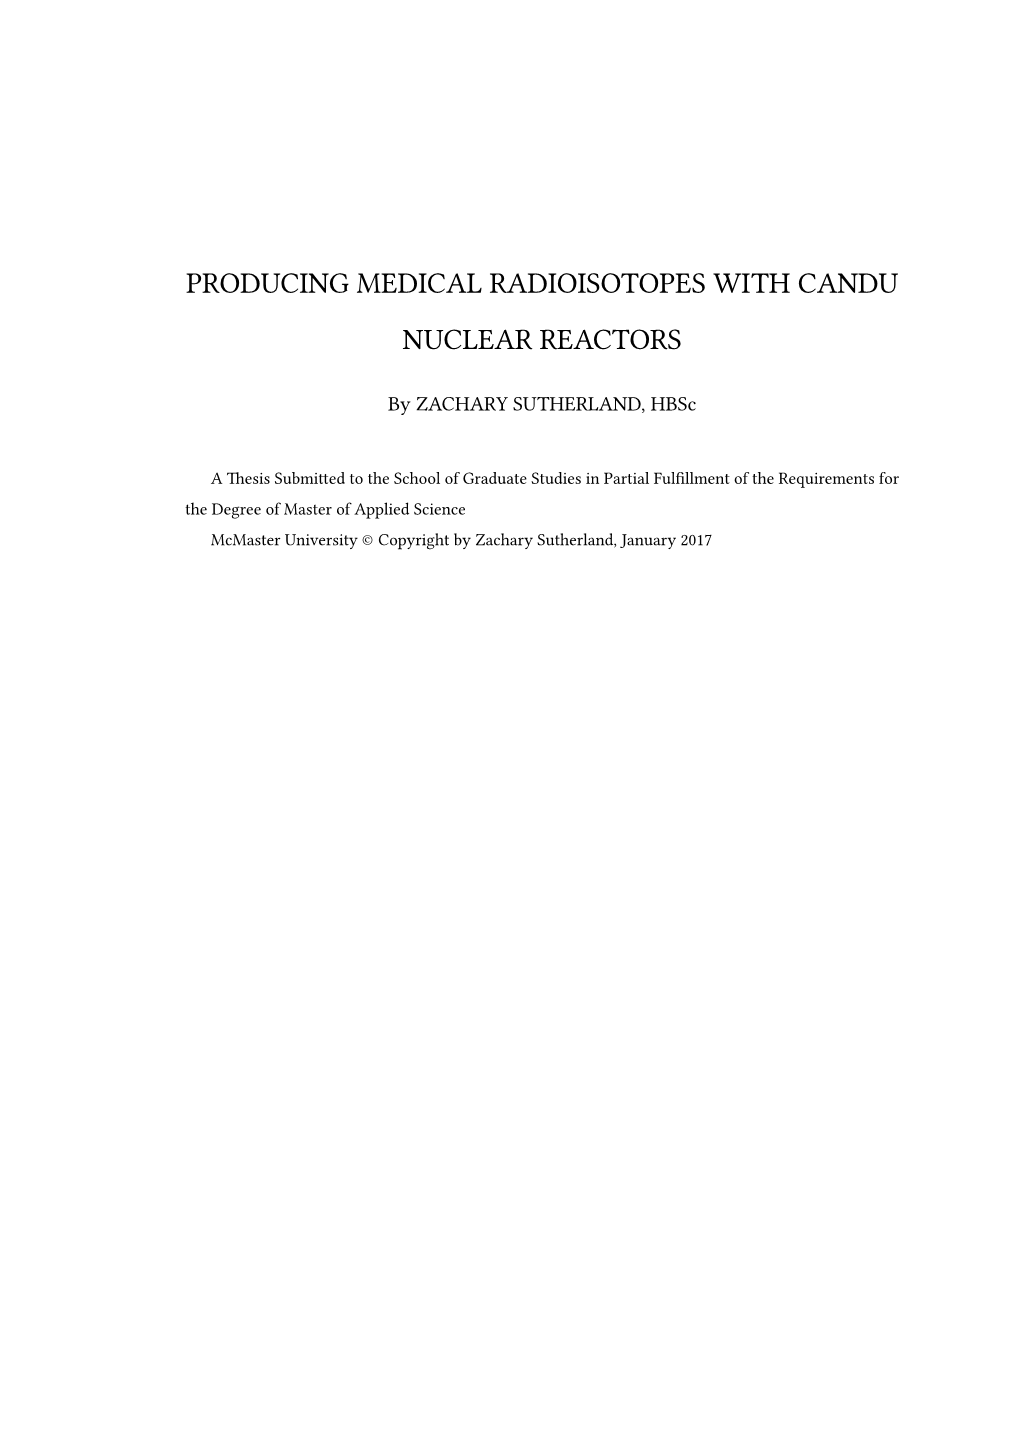 Producing Medical Radioisotopes with Candu Nuclear Reactors